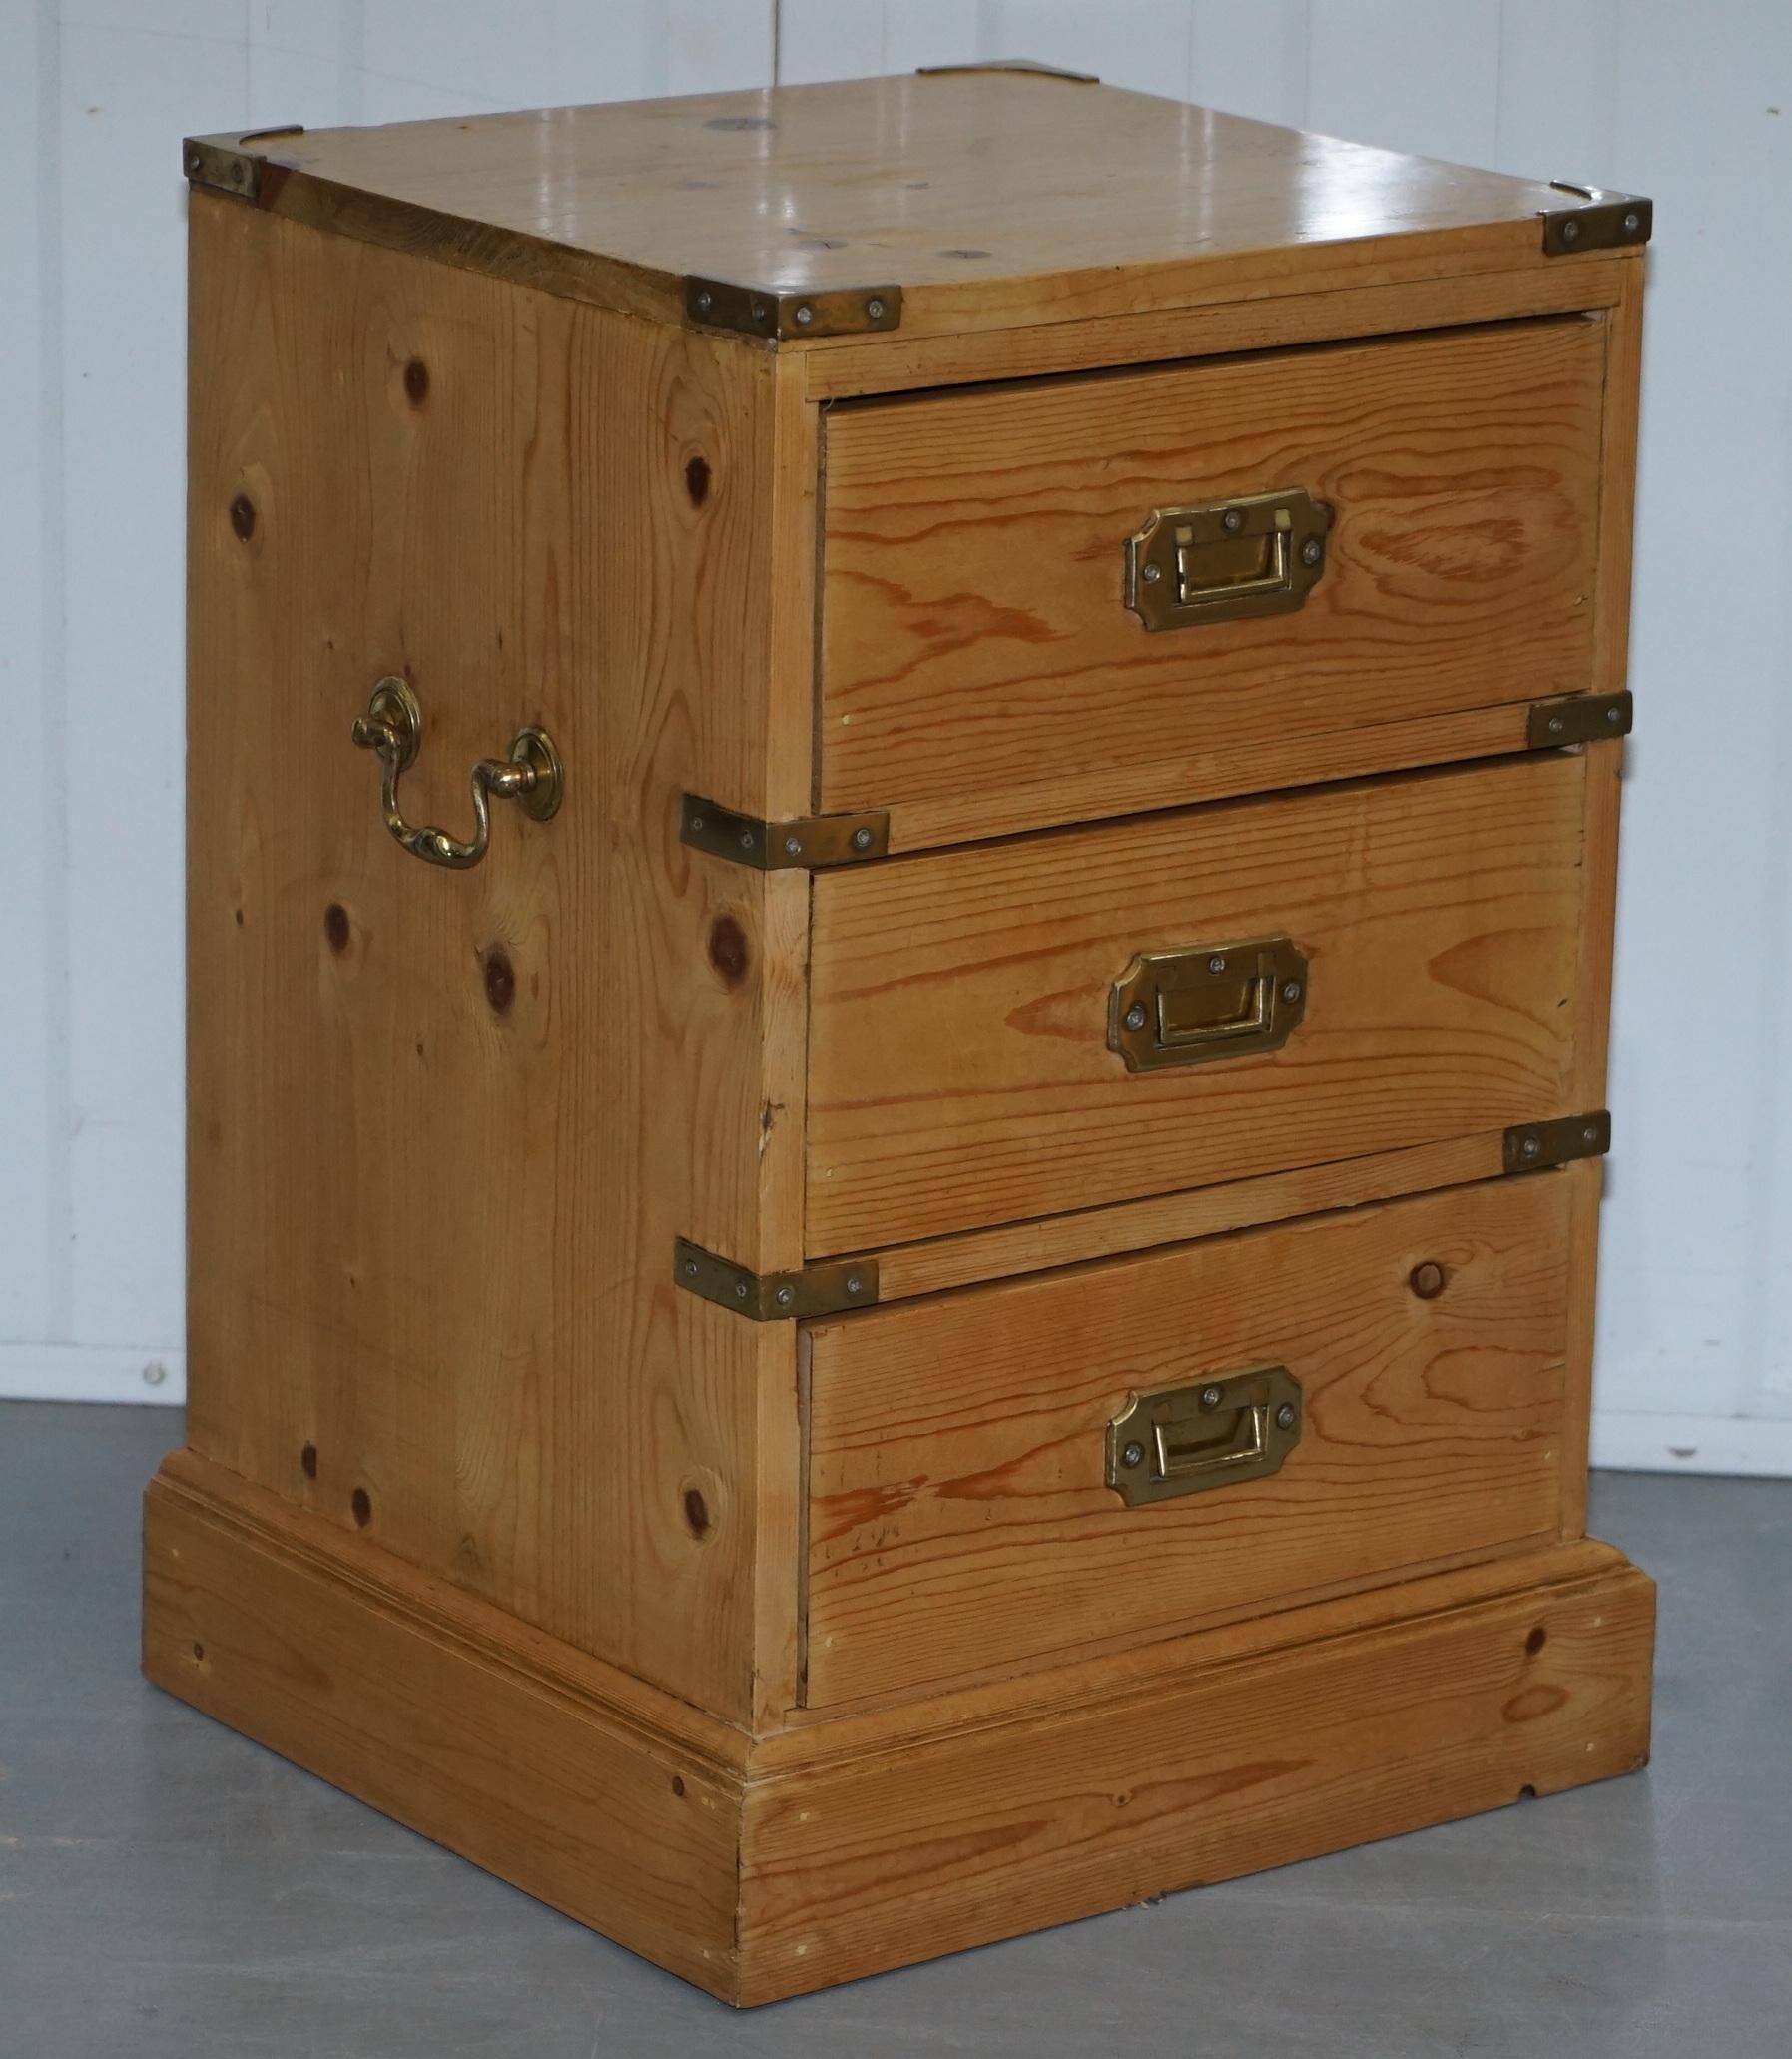 We are delighted to offer for sale this lovely pair of pitch pine military campaign side drawers

A very good looking and decorative pair, I’ve honestly never seen them in pine before, they are almost always in campour wood or mahogany

The